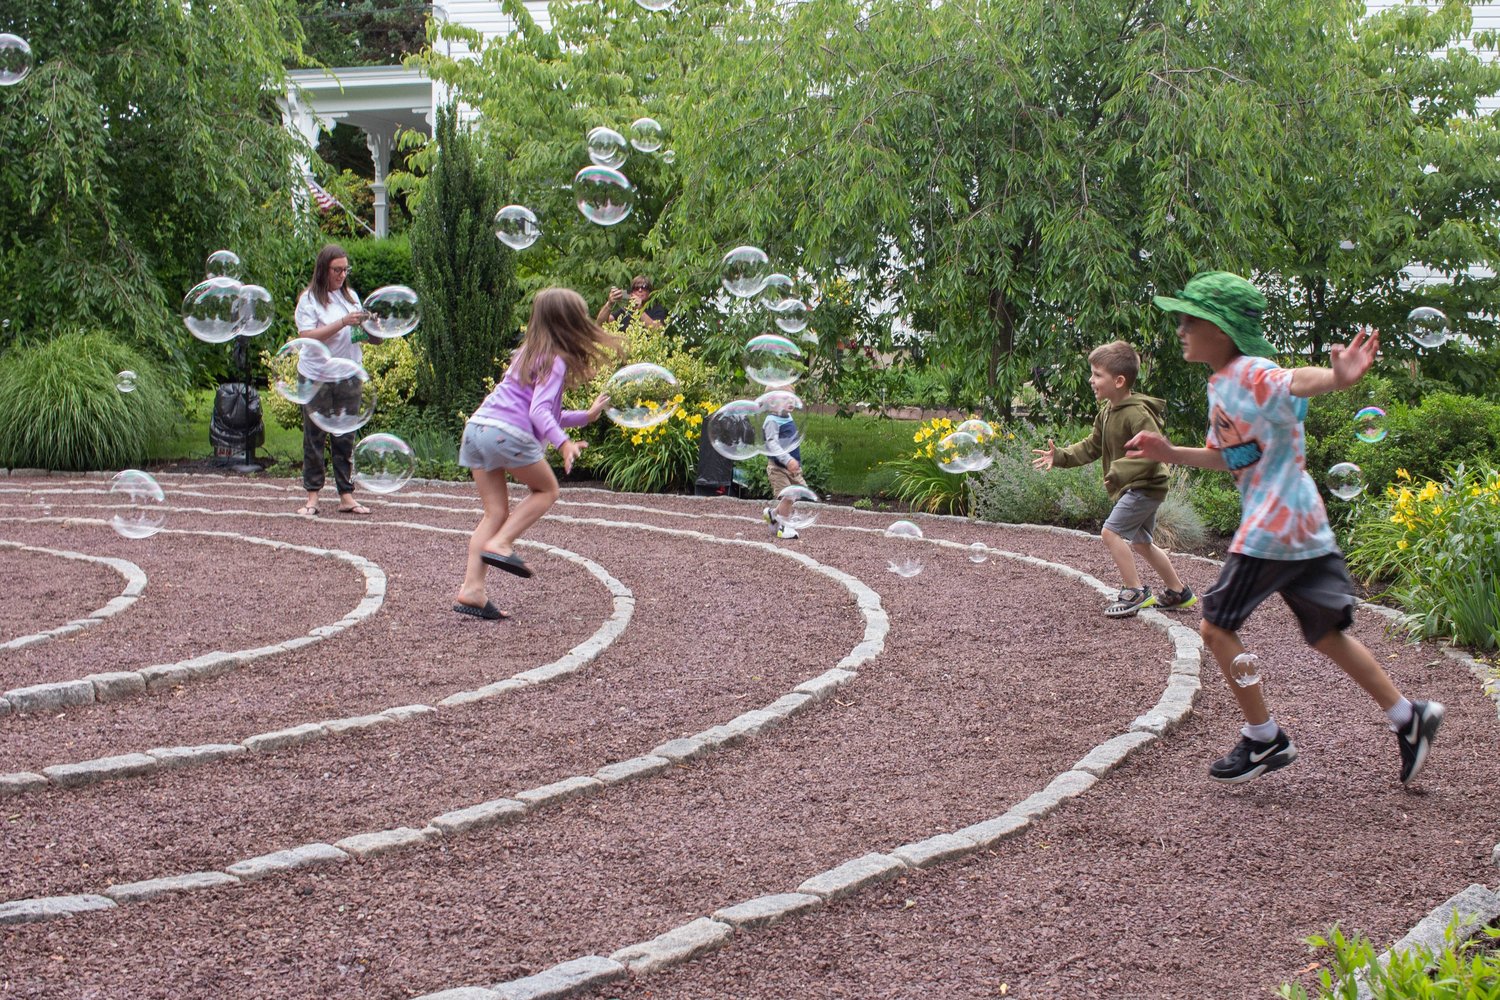 Youngsters do their best to pop bubbles created by “Bubble Witch” Lindsey Noel on the labyrinth.